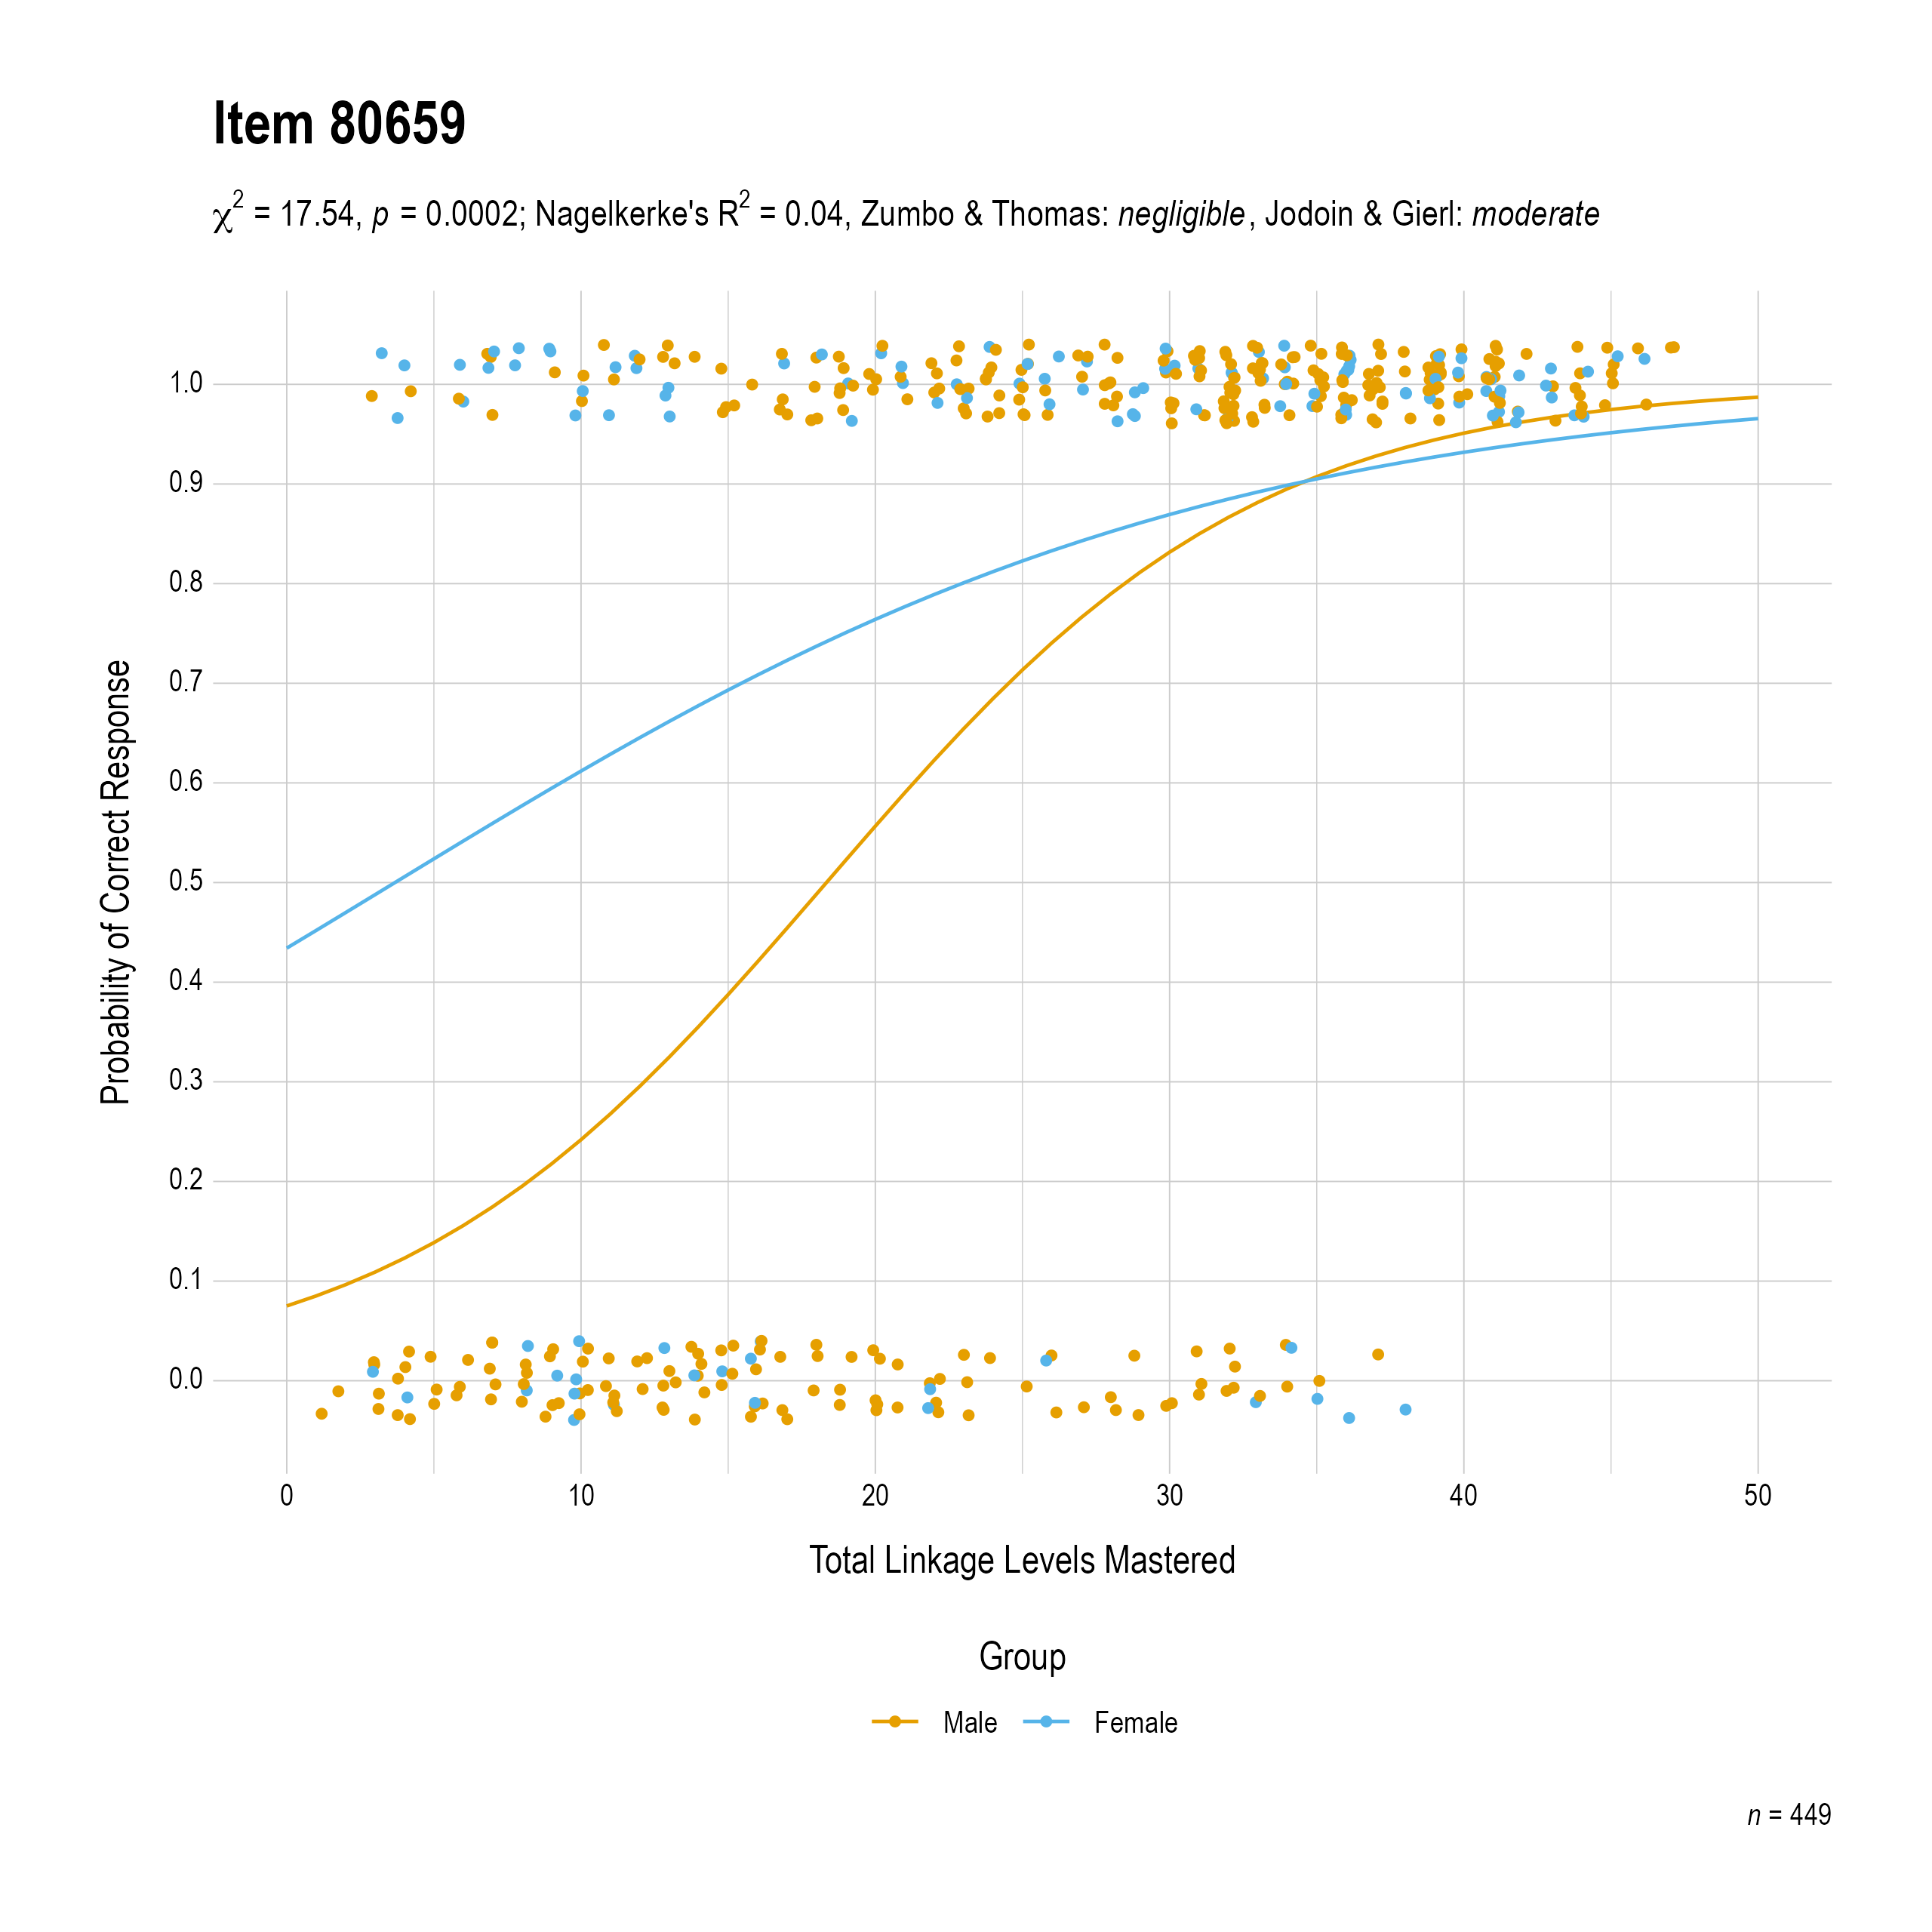 The plot of the combined gender differential item function evidence for English language arts item 80659. The figure contains points shaded by group. The figure also contains a logistic regression curve for each group. The total linkage levels mastered in is on the x-axis, and the probability of a correct response is on the y-axis.